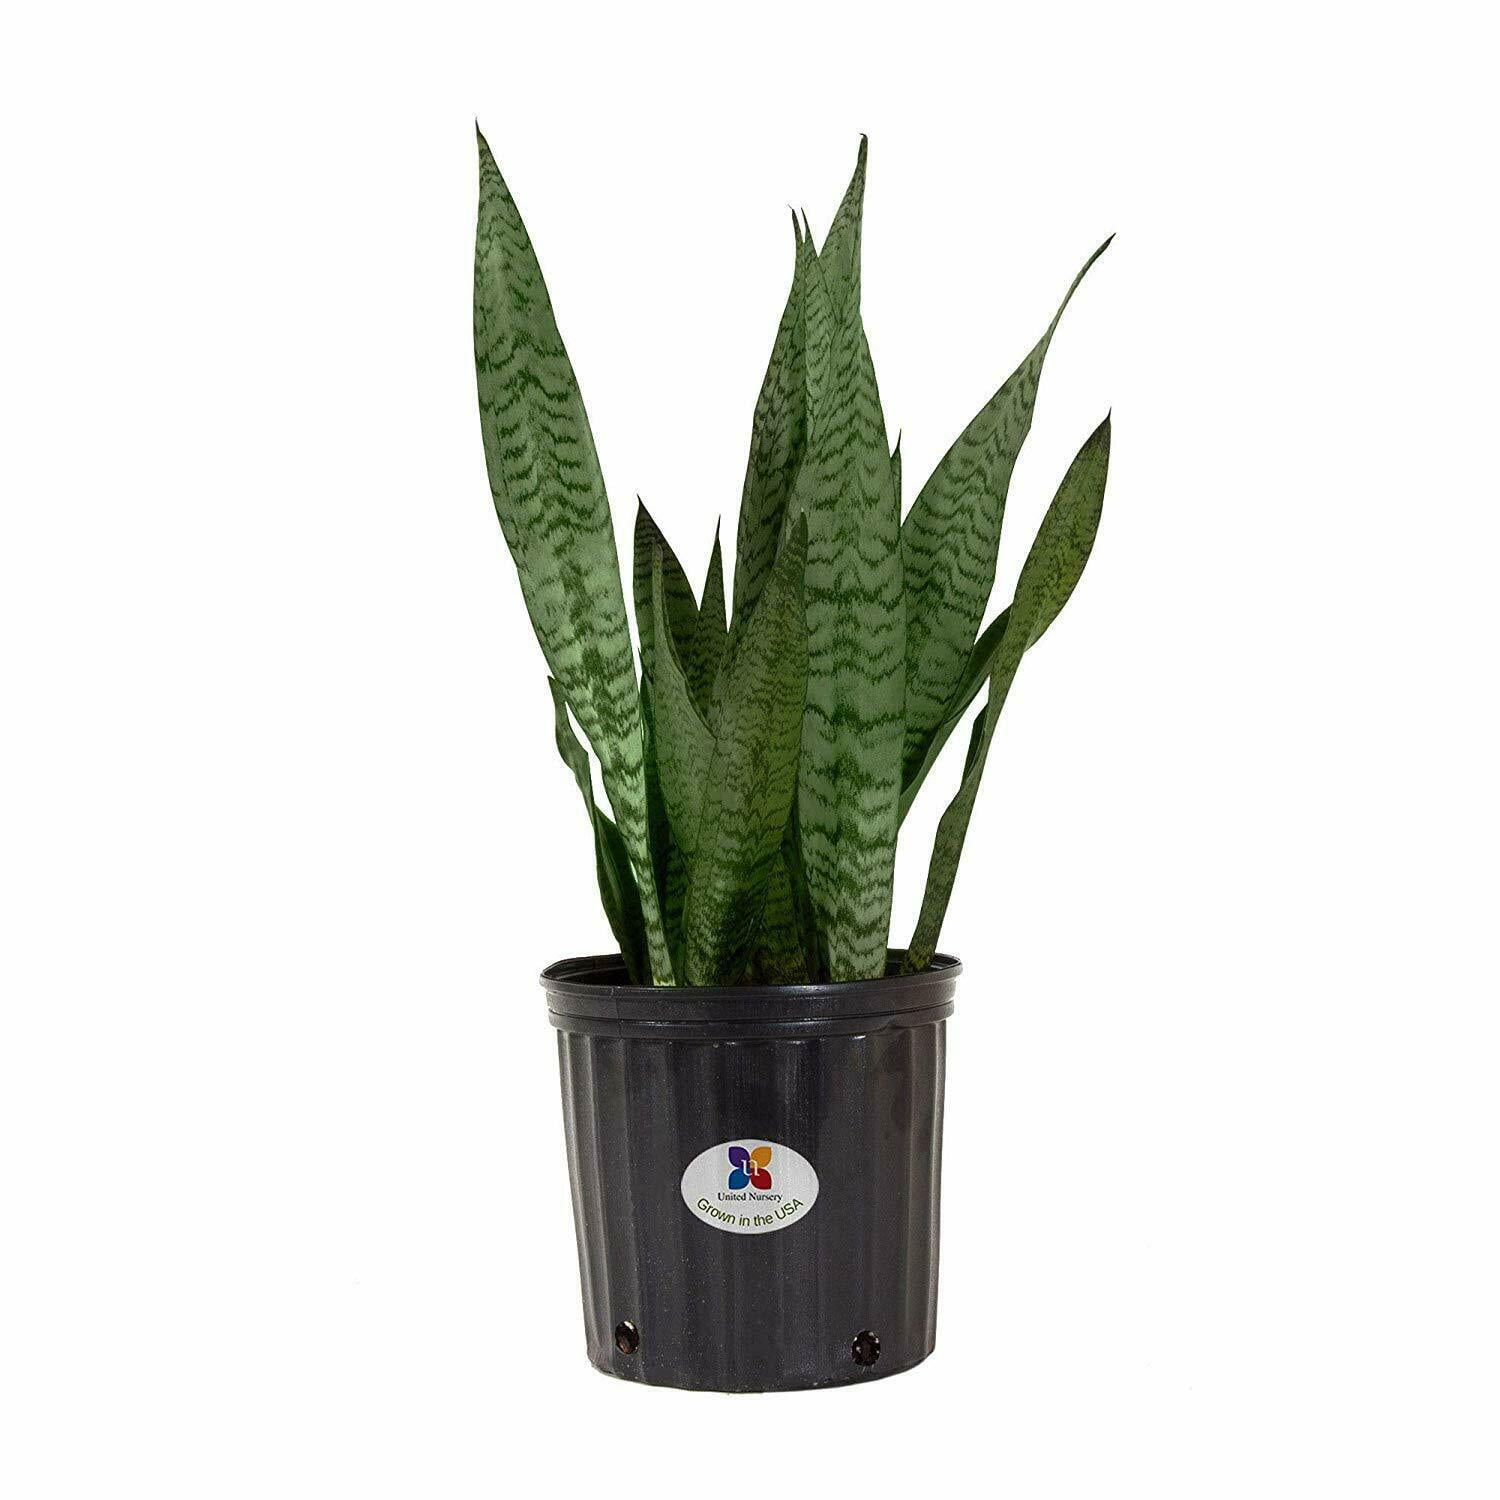 This a  wysiwyg plant collection. An Eco Pot Collection  with Sansevieria  laurentii a ZZ plant  and a Parlor palm